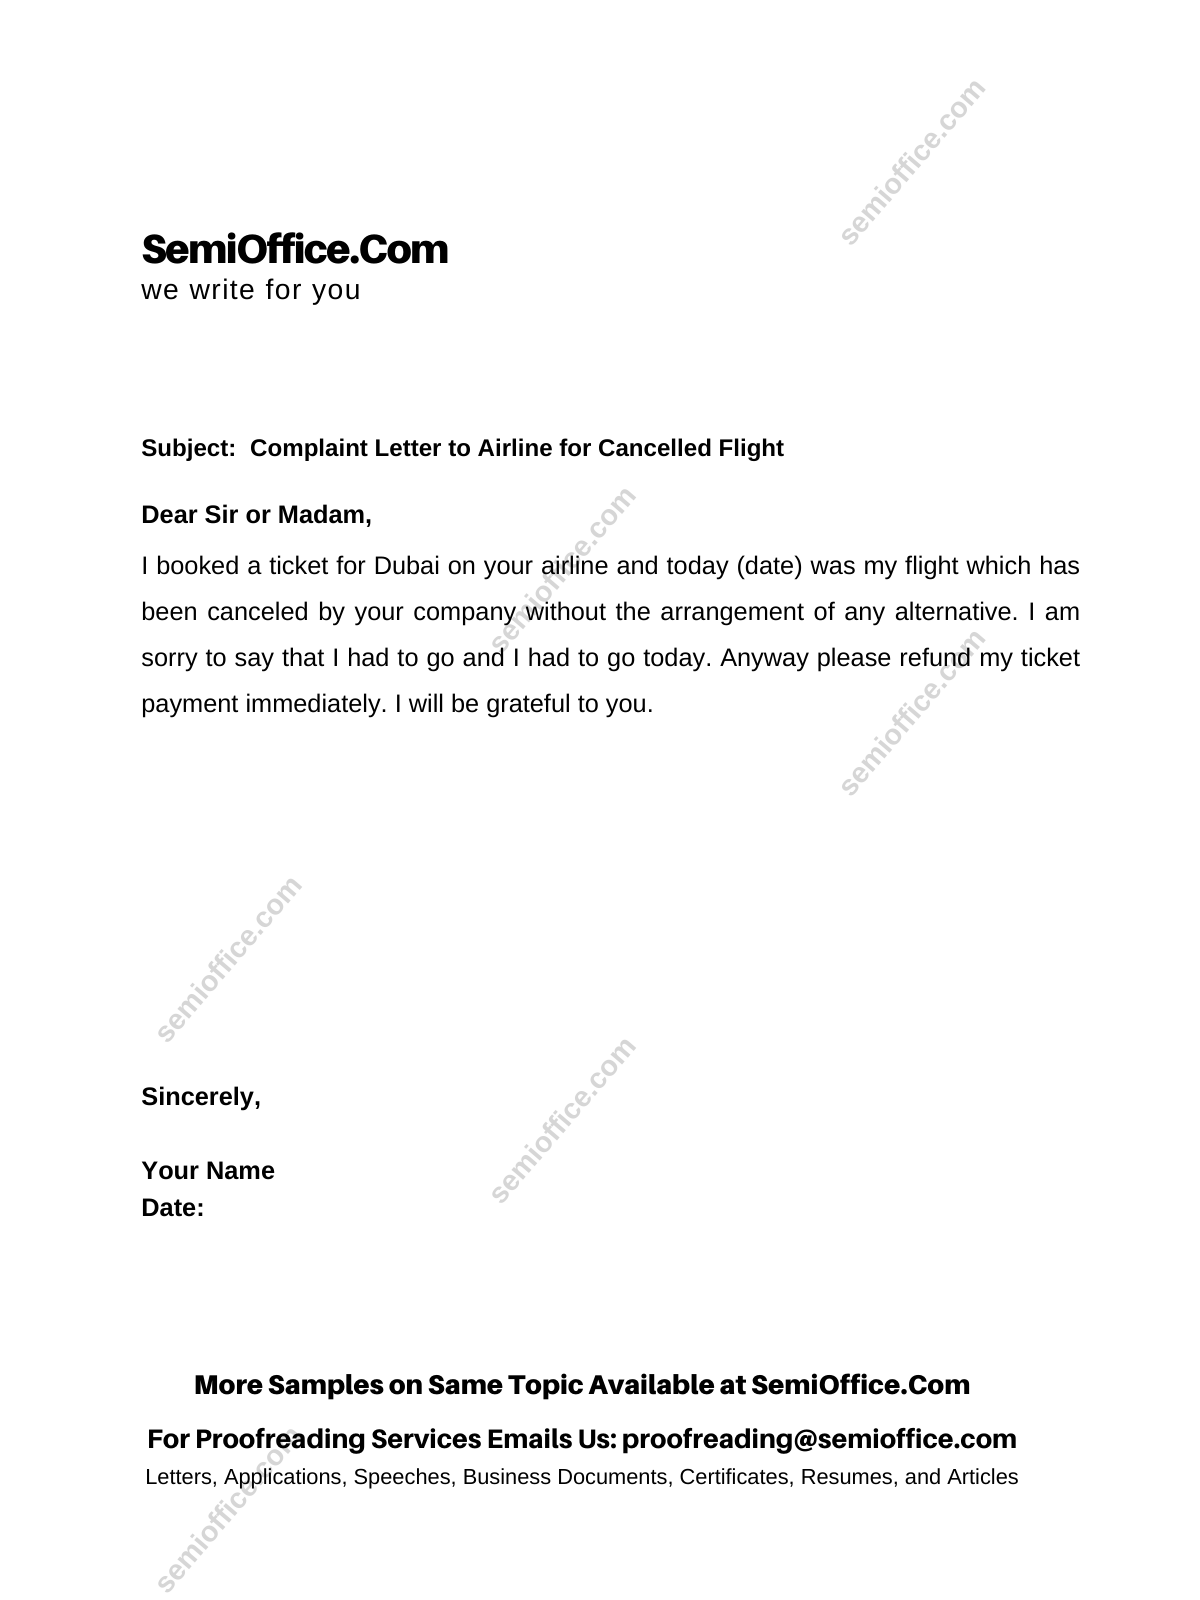 complaint-letter-to-airline-for-cancelled-flight-semioffice-com